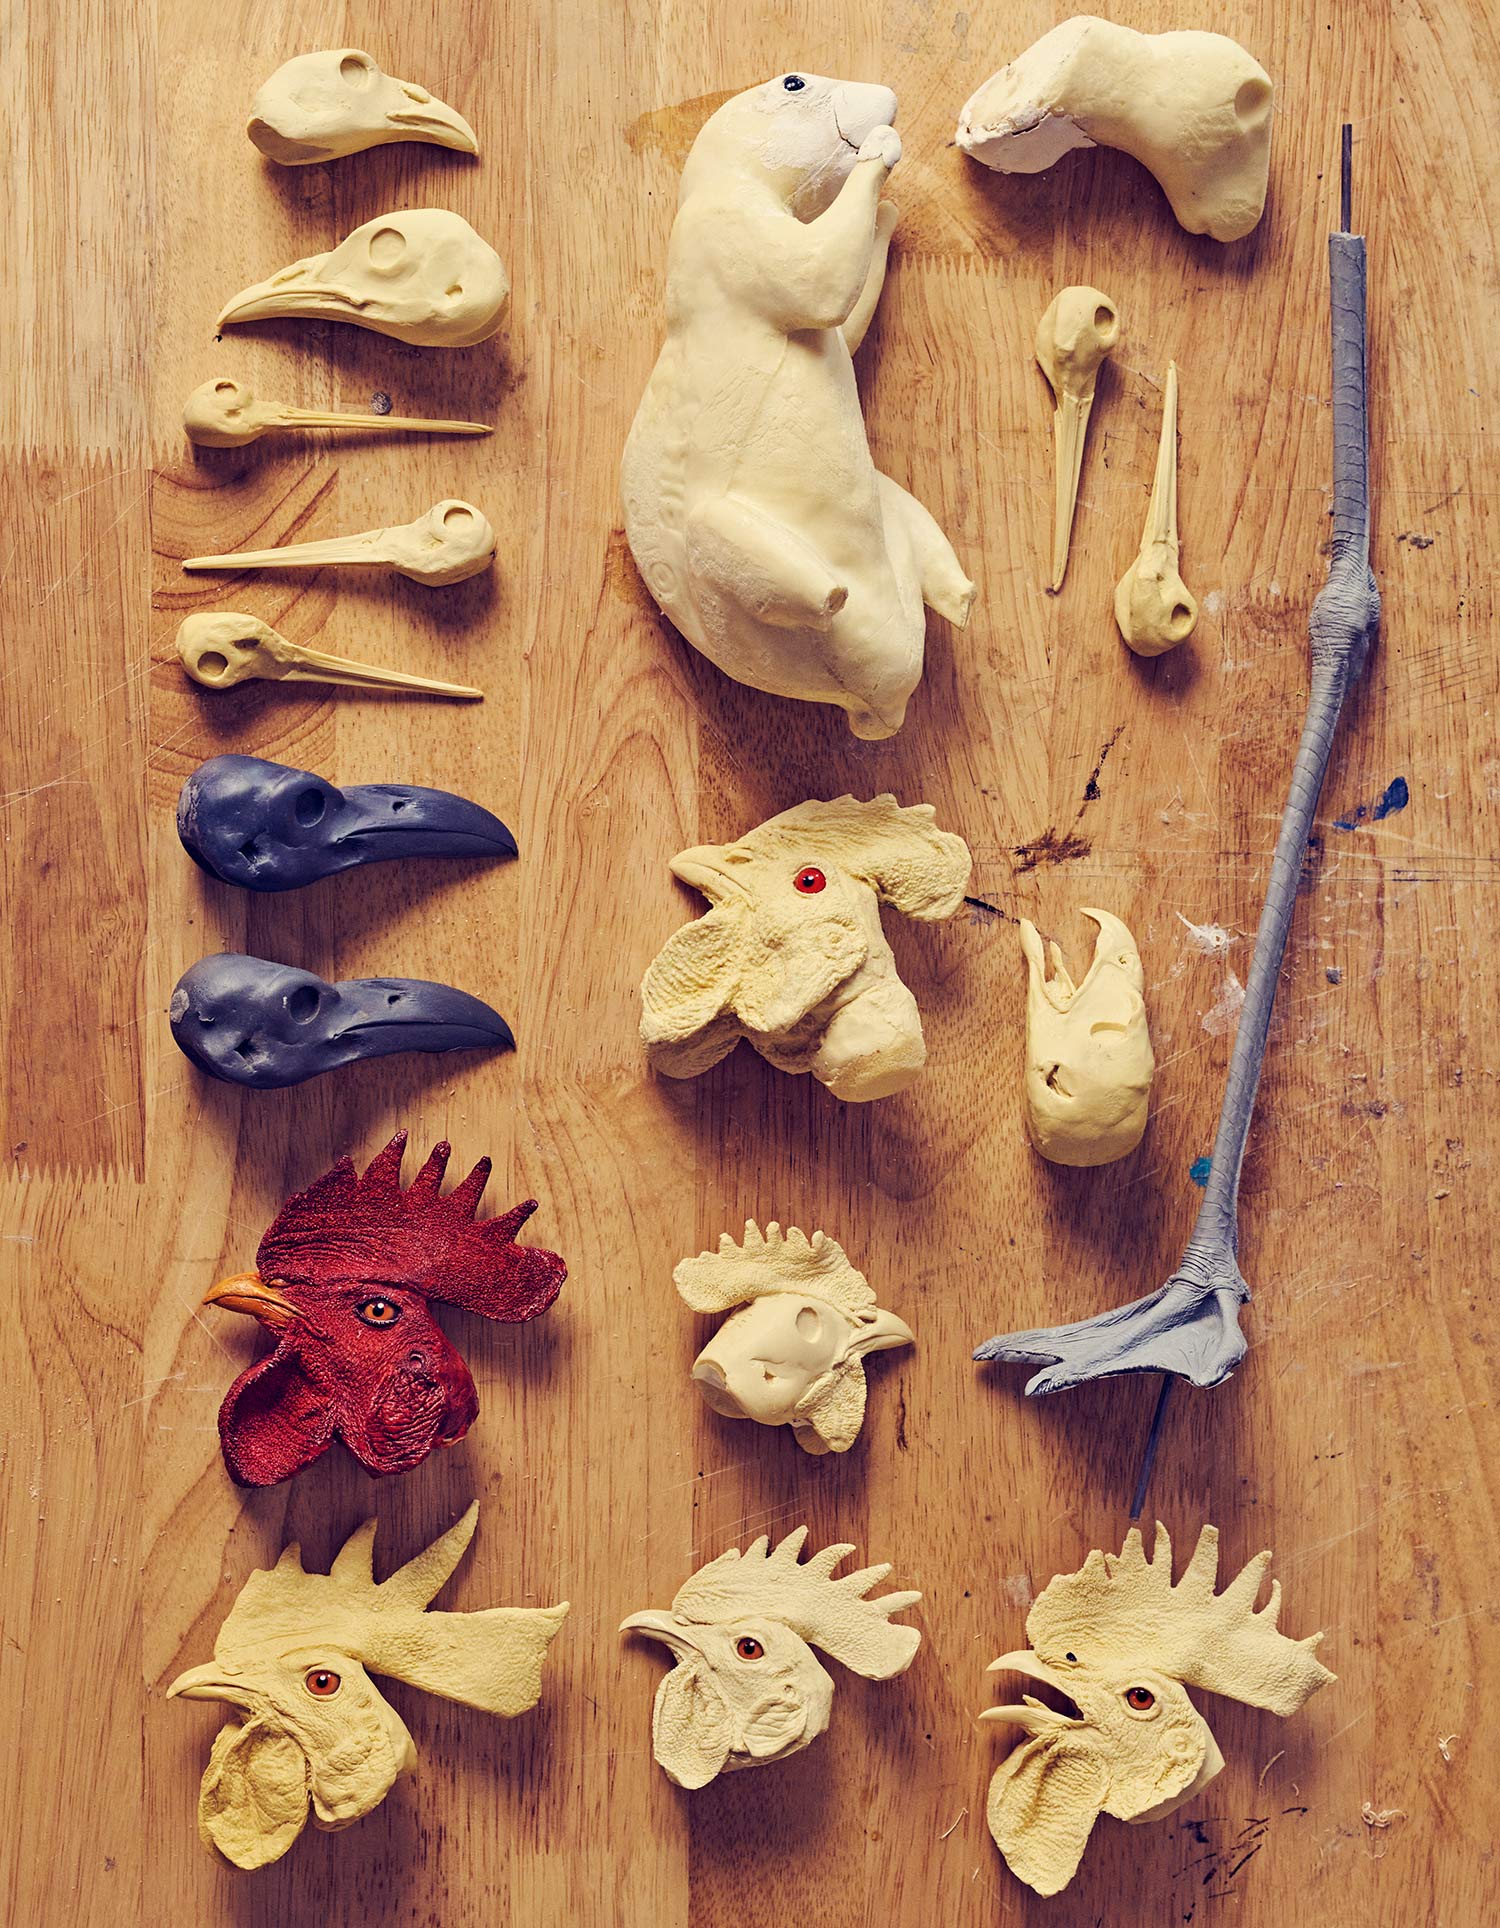 bird heads and leg, plus other animal parts made from foam